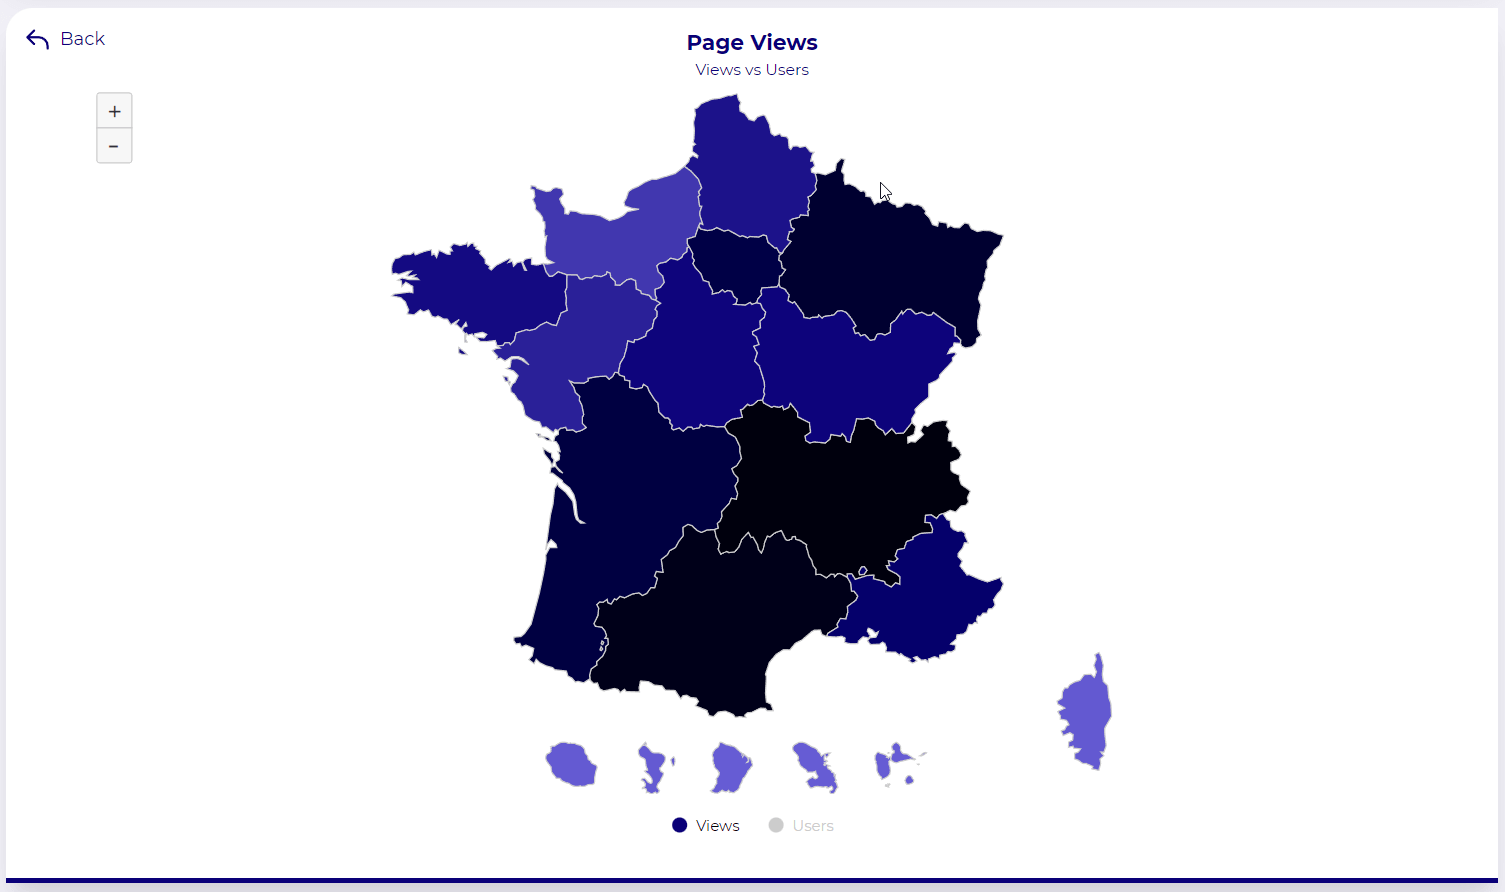 Map of France showing number heatmap of pageviews